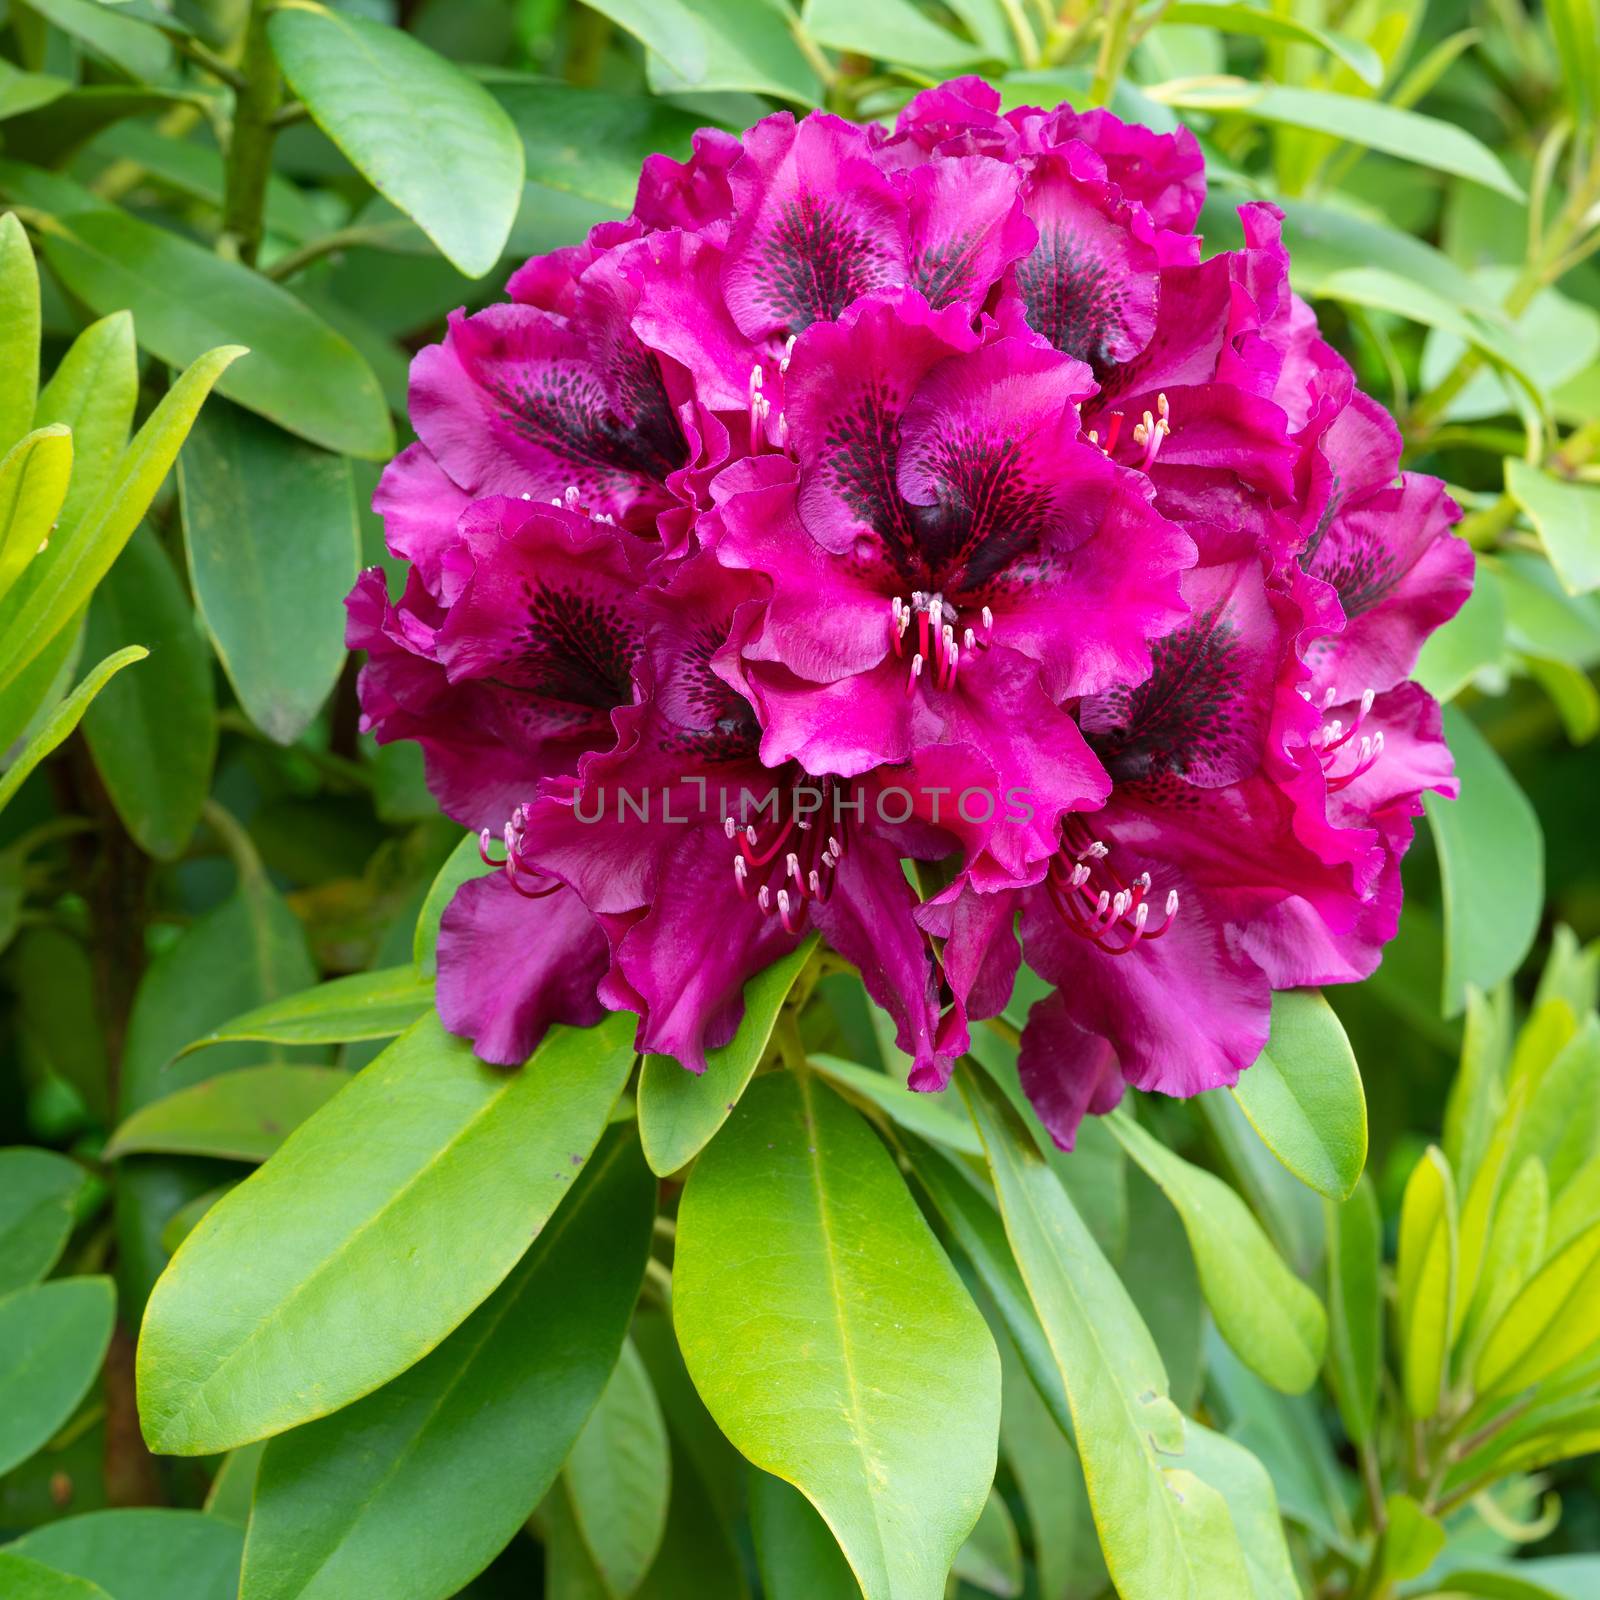 Rhododendron Hybrid Midnight Beauty (Rhododendron hybrid), close up of the flower head